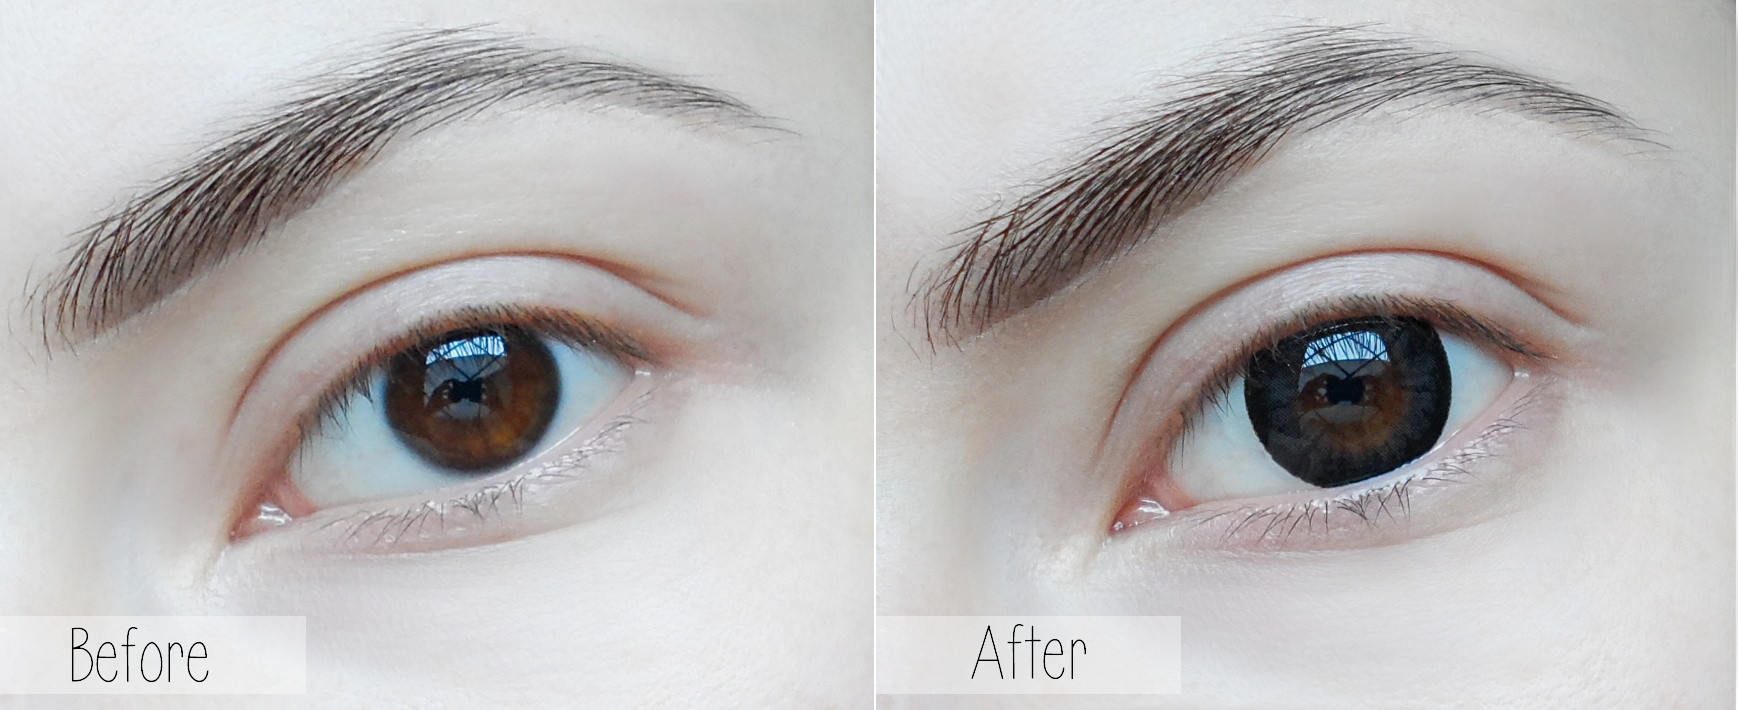 gray eye-enlarging circle lenses review, pictures, and before/after demo by blogger, 目を拡大するサークルレンズレビュー